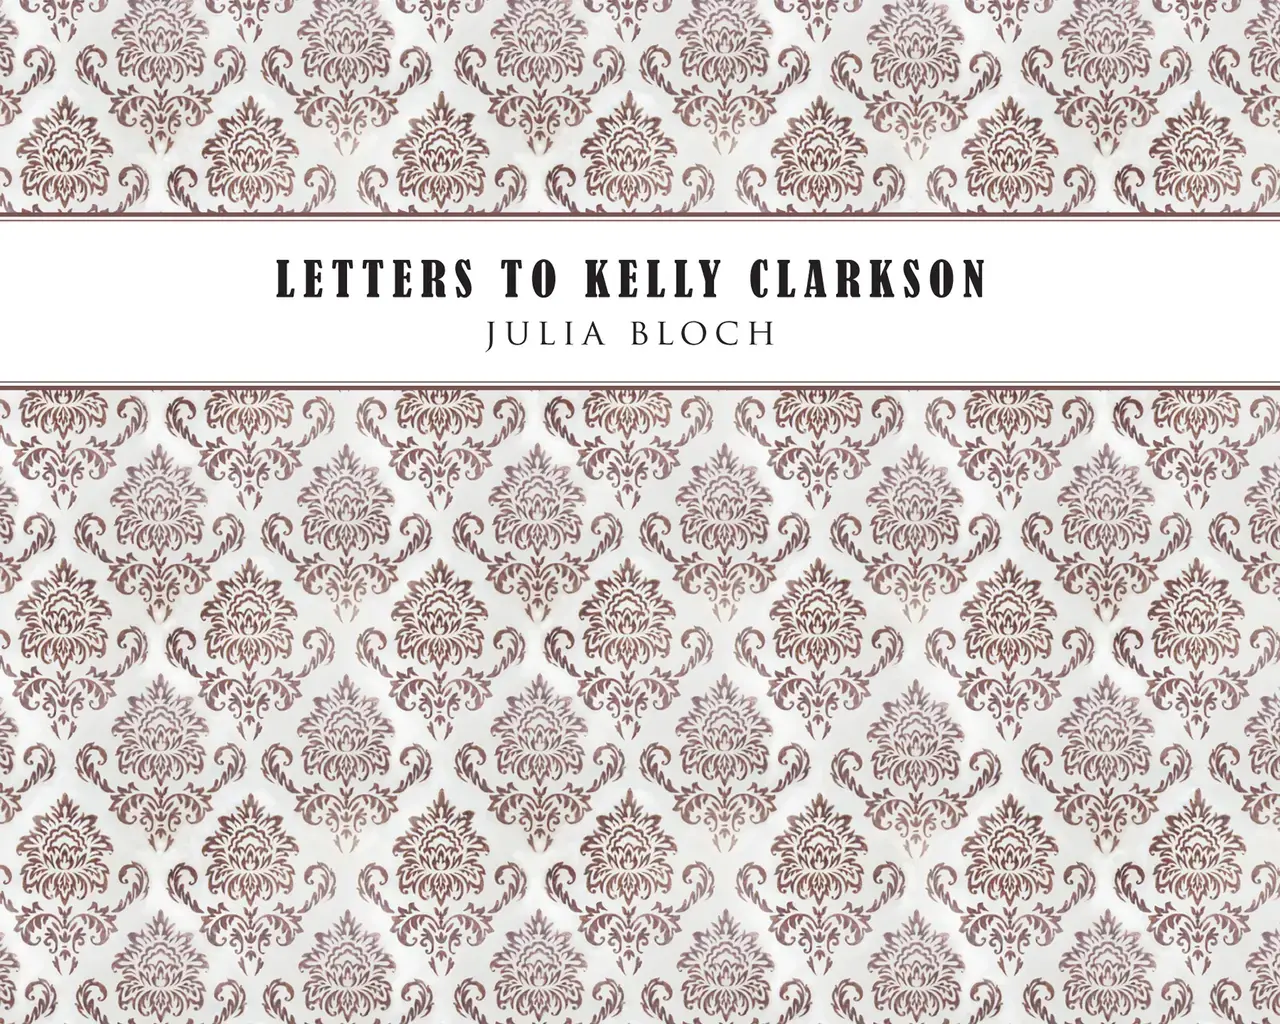 Julia Bloch, Letters to Kelly Clarkson, Sidebrow Books. Cover art by Laura Splan.